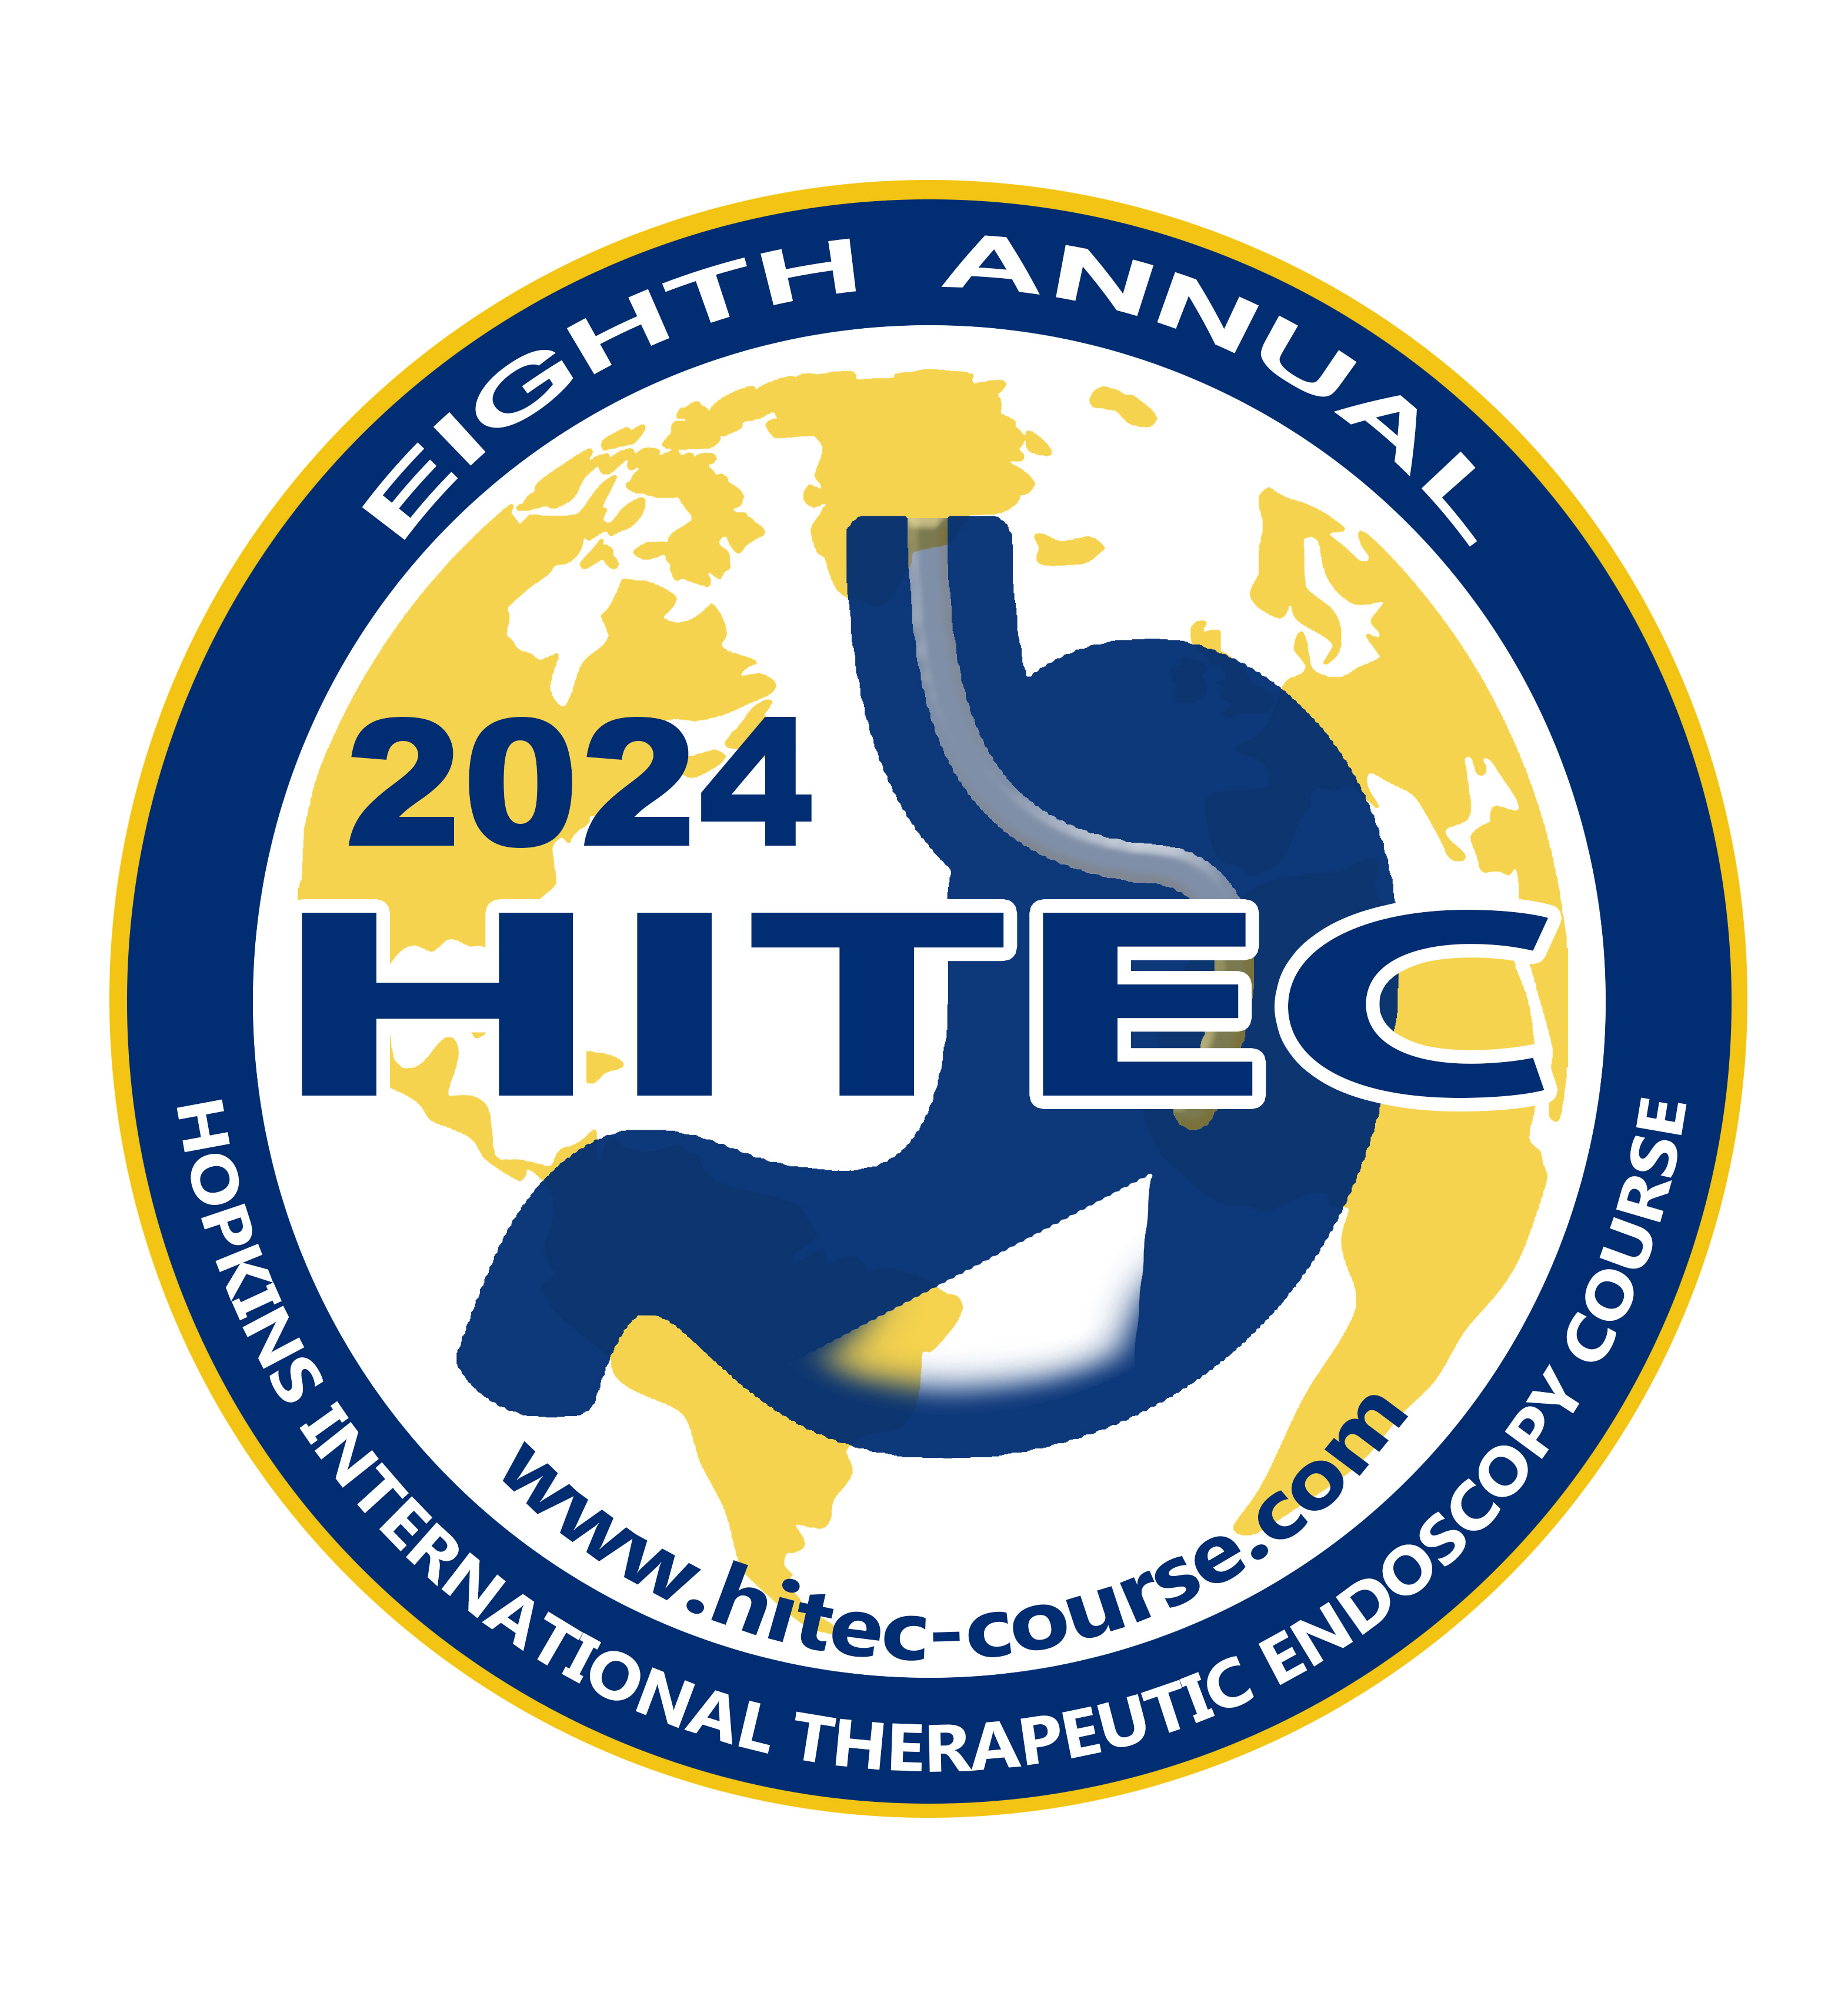 Eighth Annual Hopkins International Therapeutic Endoscopy Course - HITEC 2024 Banner